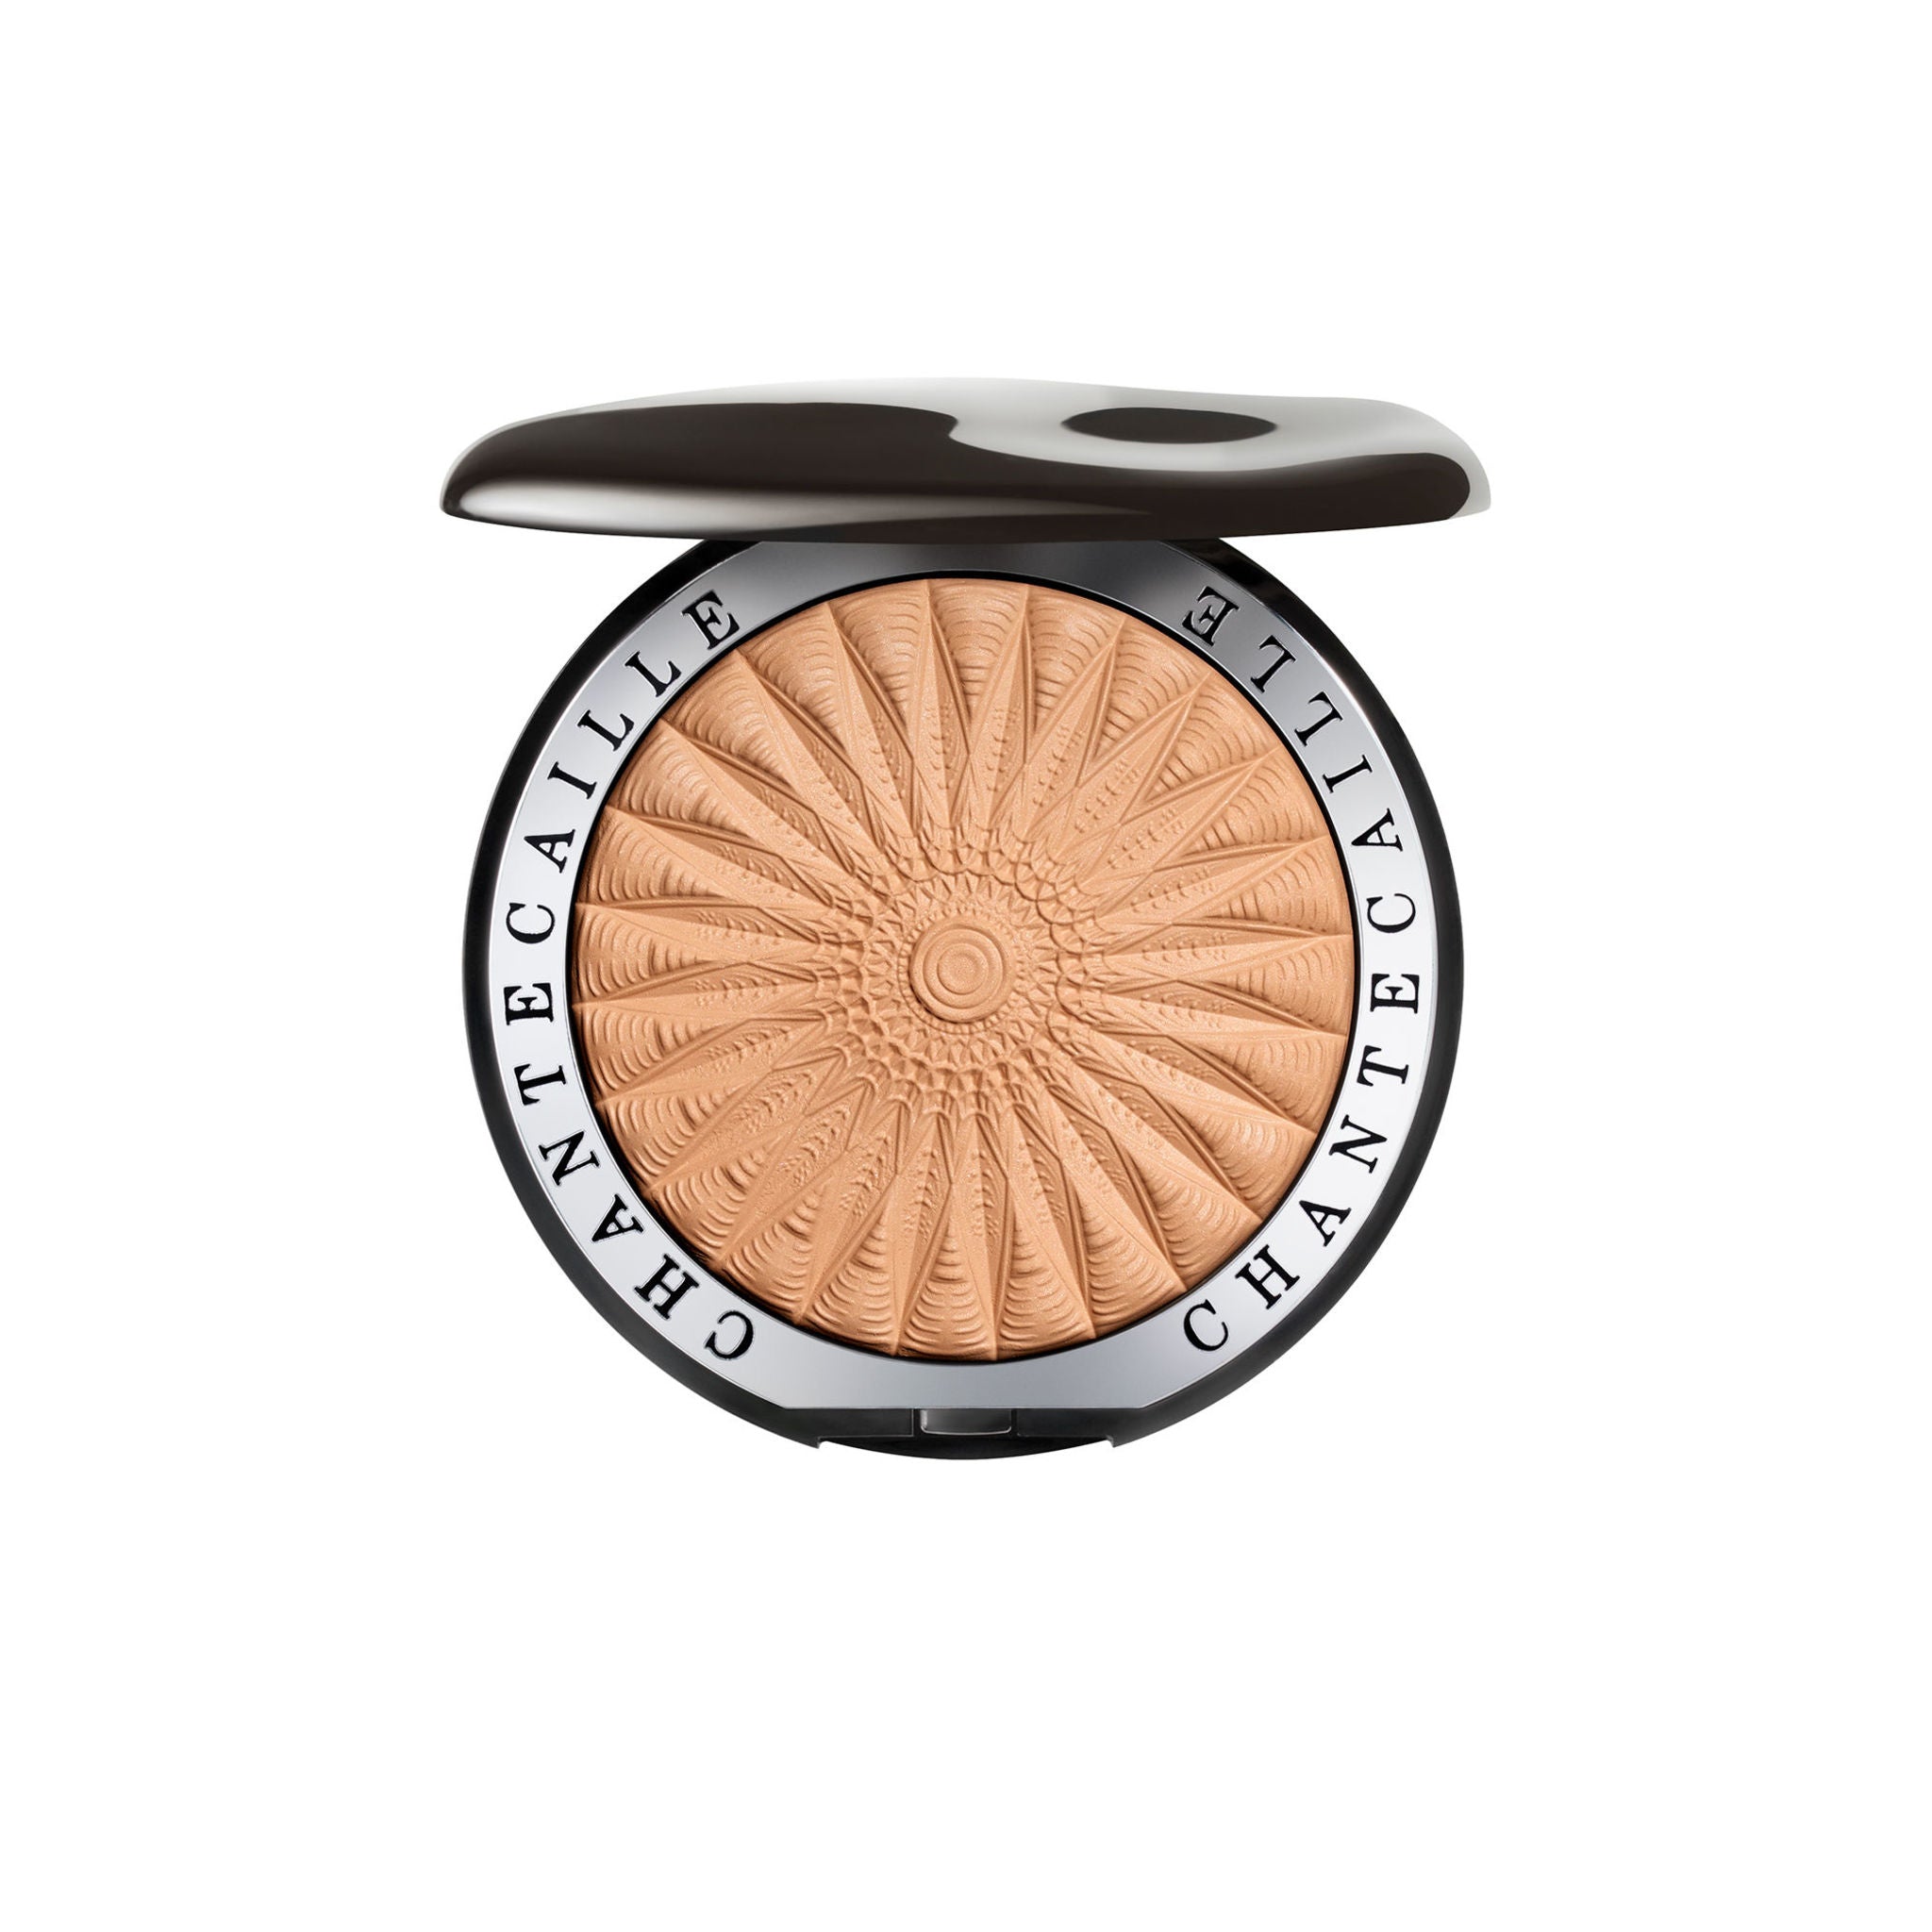 Chantecaille Perfect Blur Finishing Powder Medium/Deep main image. This product is in the color bronze, for medium and deep complexions